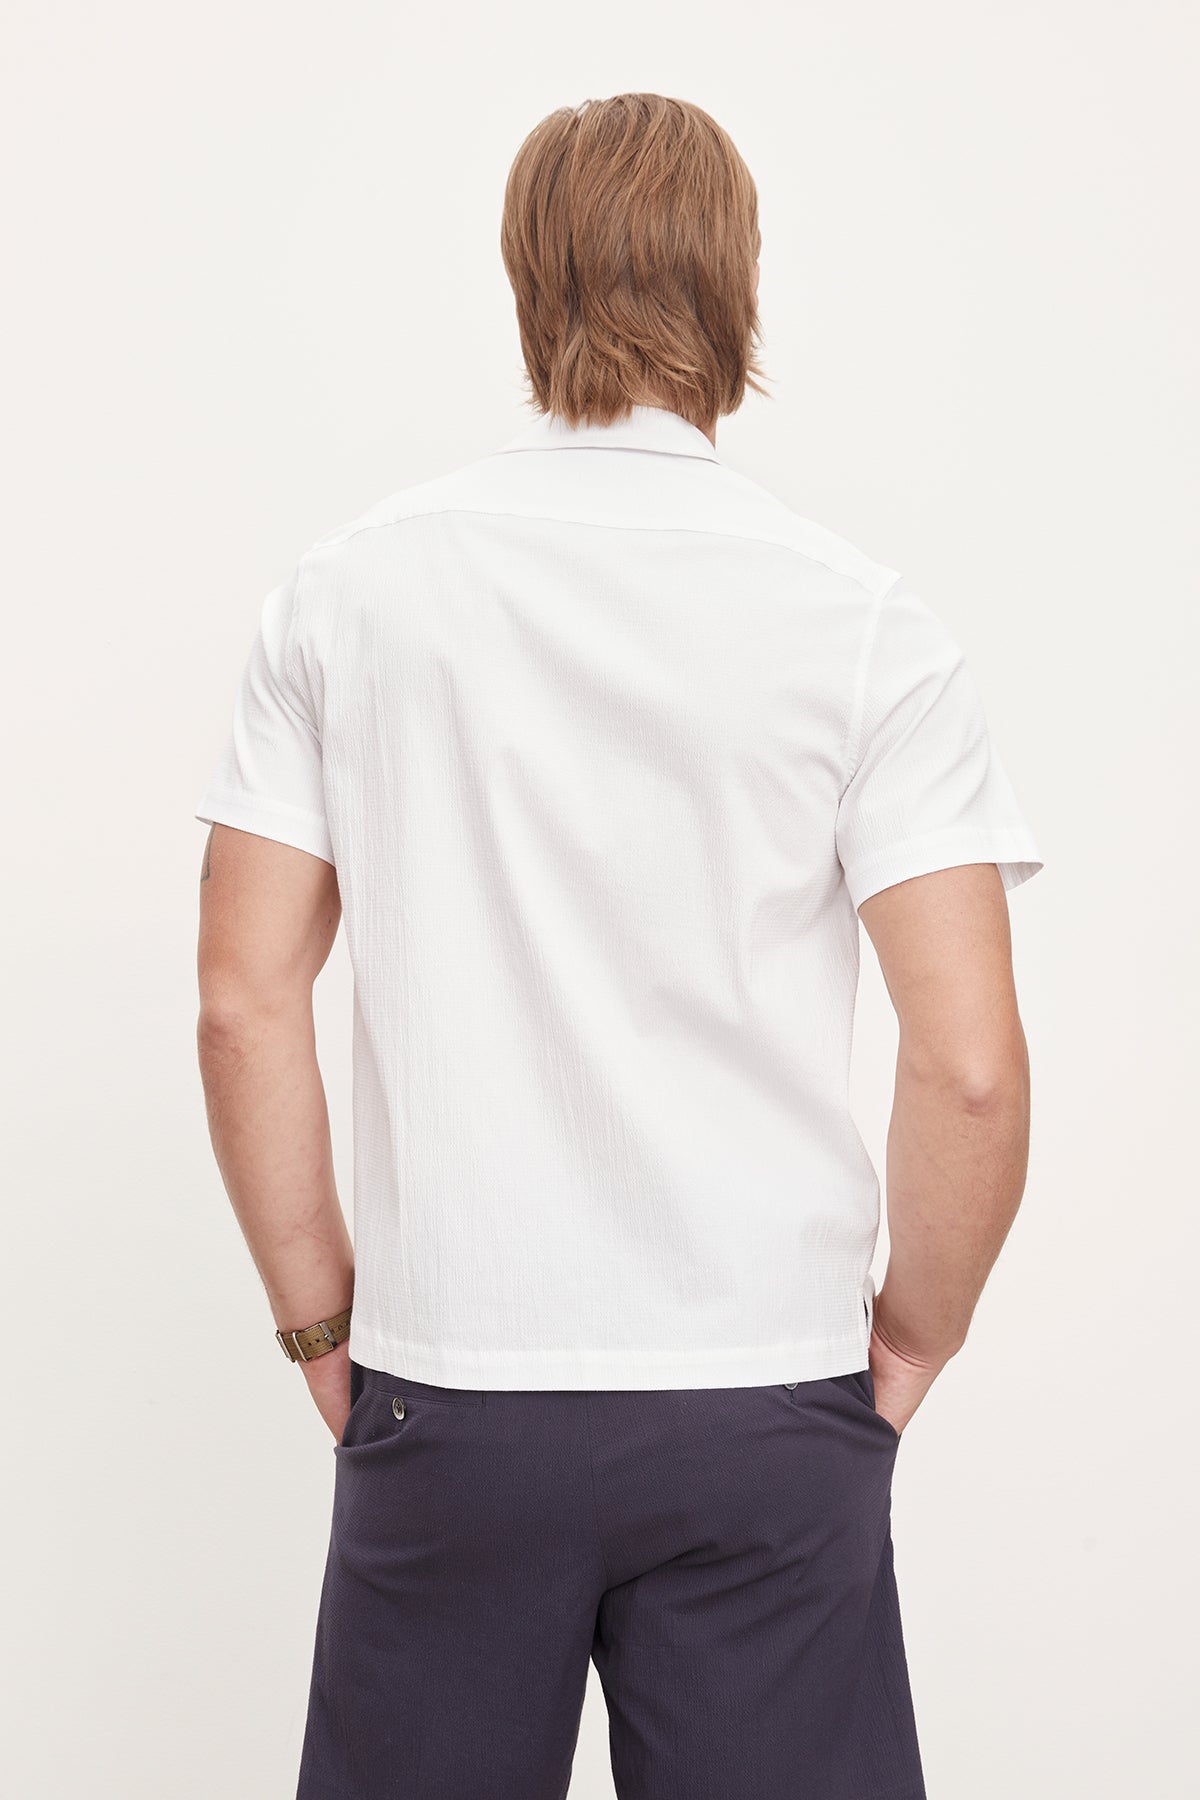   Man standing with his back to the camera, wearing a white seersucker cotton FRANK BUTTON-UP SHIRT by Velvet by Graham & Spencer and dark trousers, against a plain light background. 